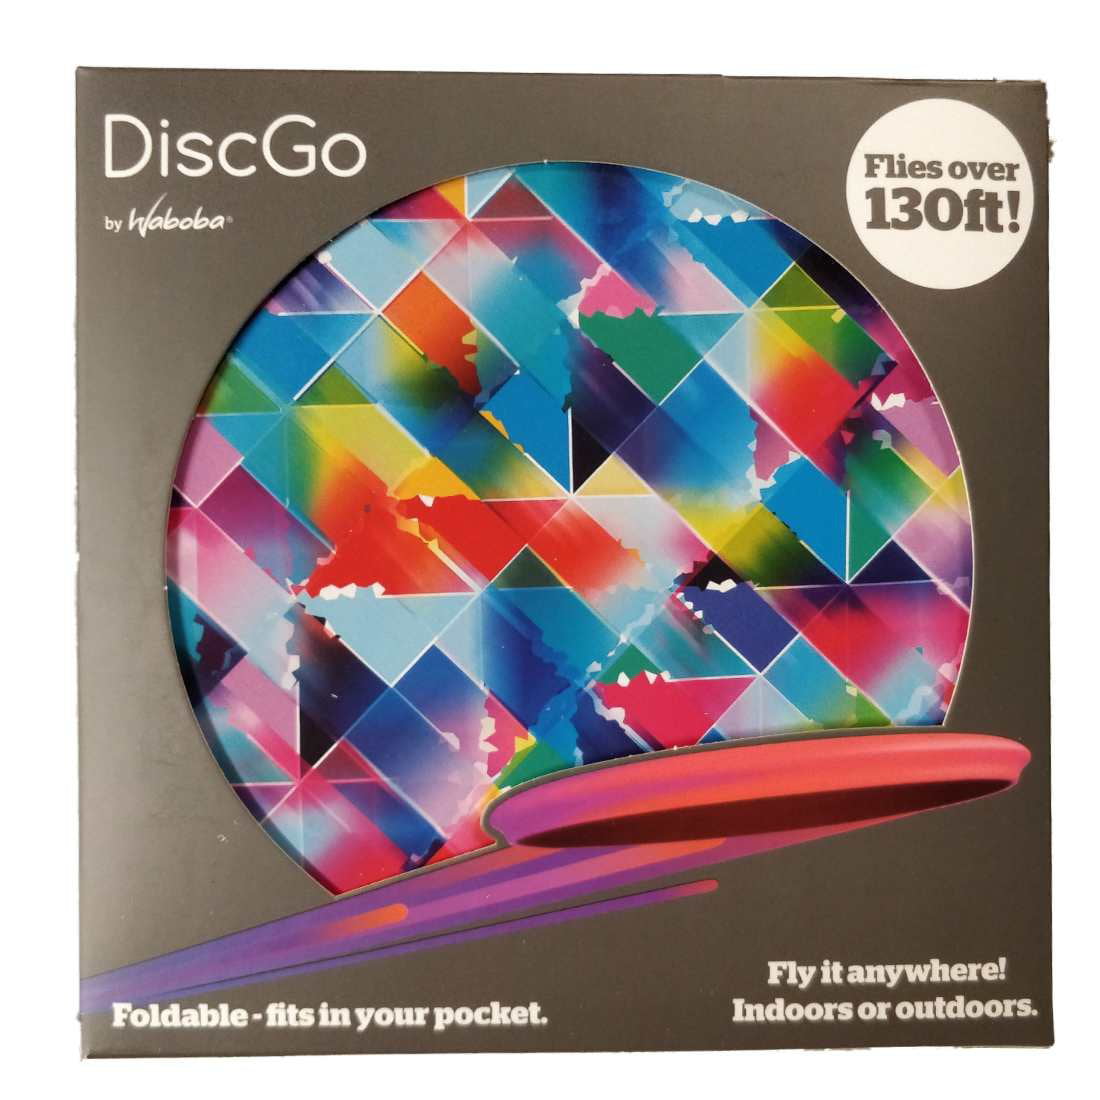 flies over 130 ft New In Box DiscGo frisbee by Waboba Fly It Anywhere 